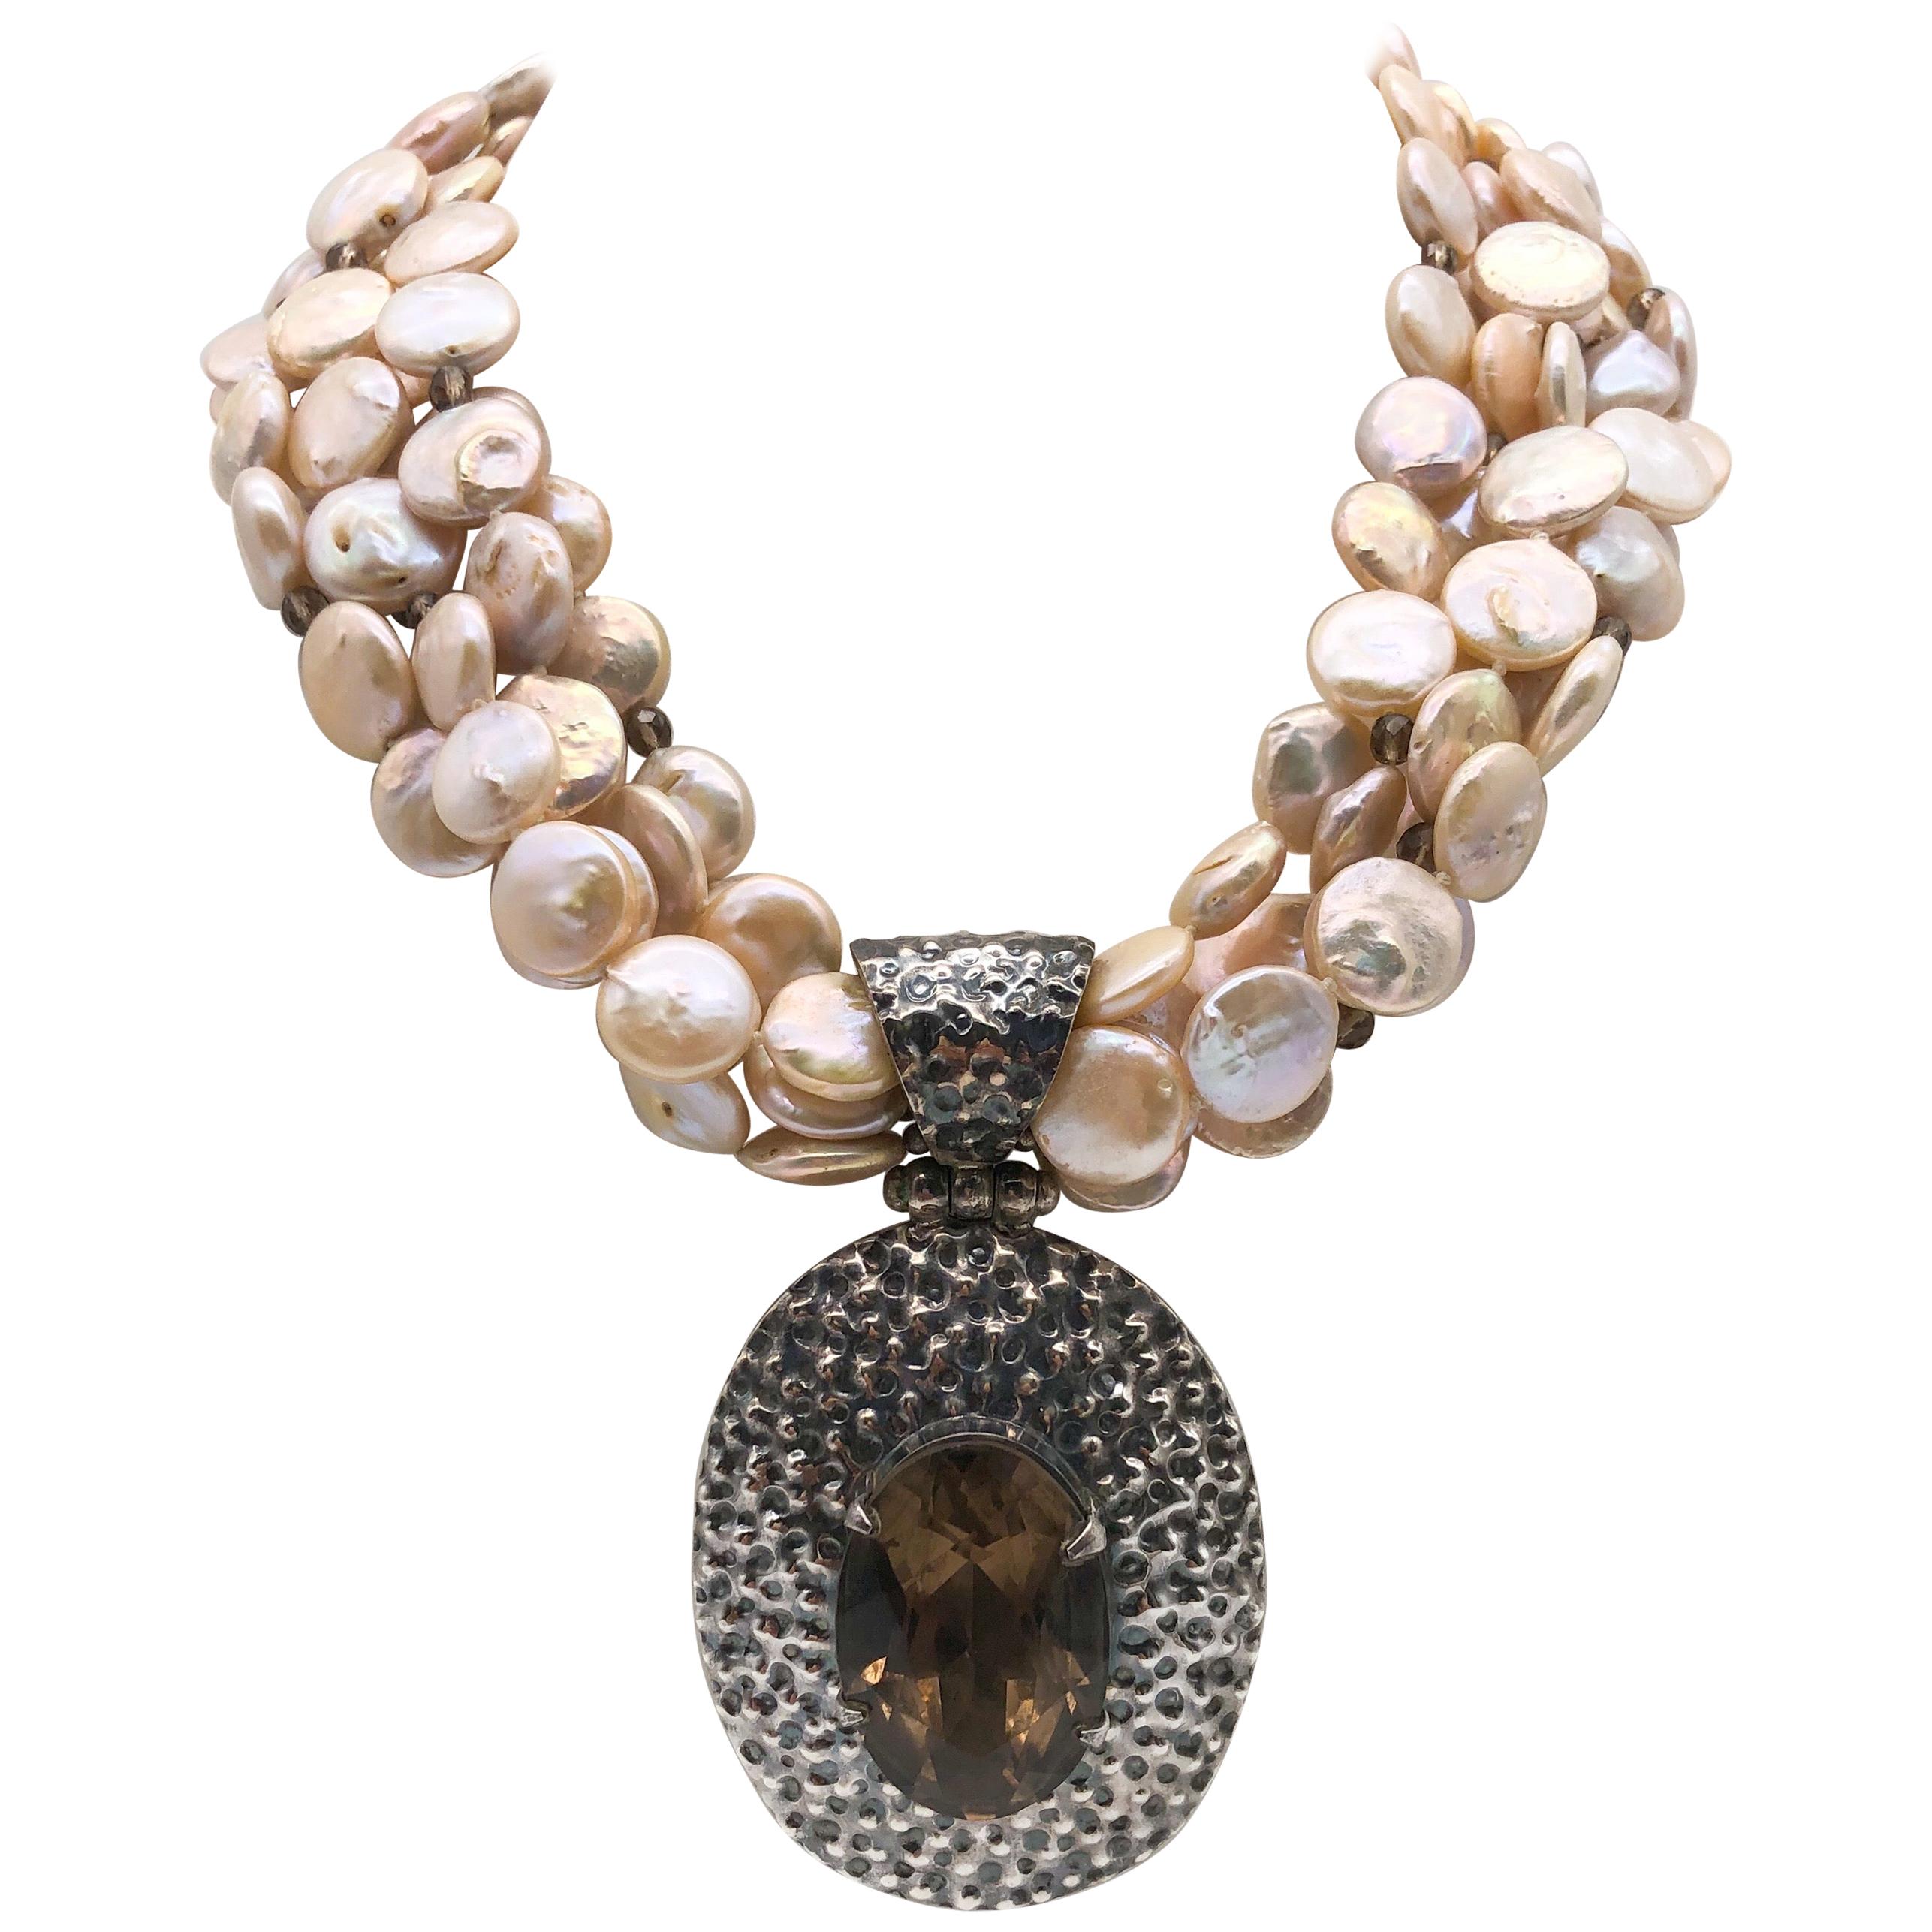 A.Jeschel 5 strand coin pearl necklace and Smokey Quartz necklace. For Sale